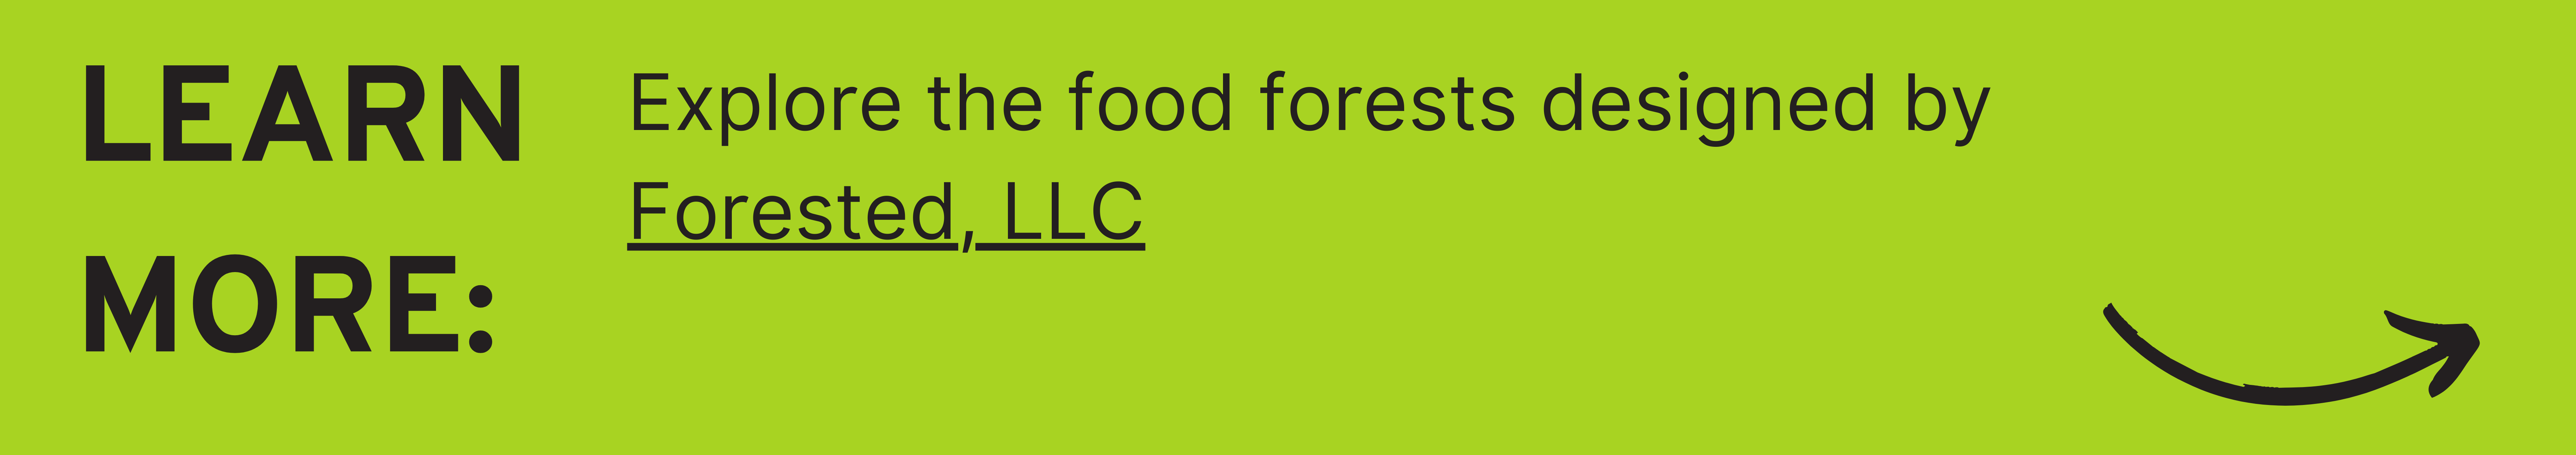 Learn More: Explore the food forests designed by Forested, LLC